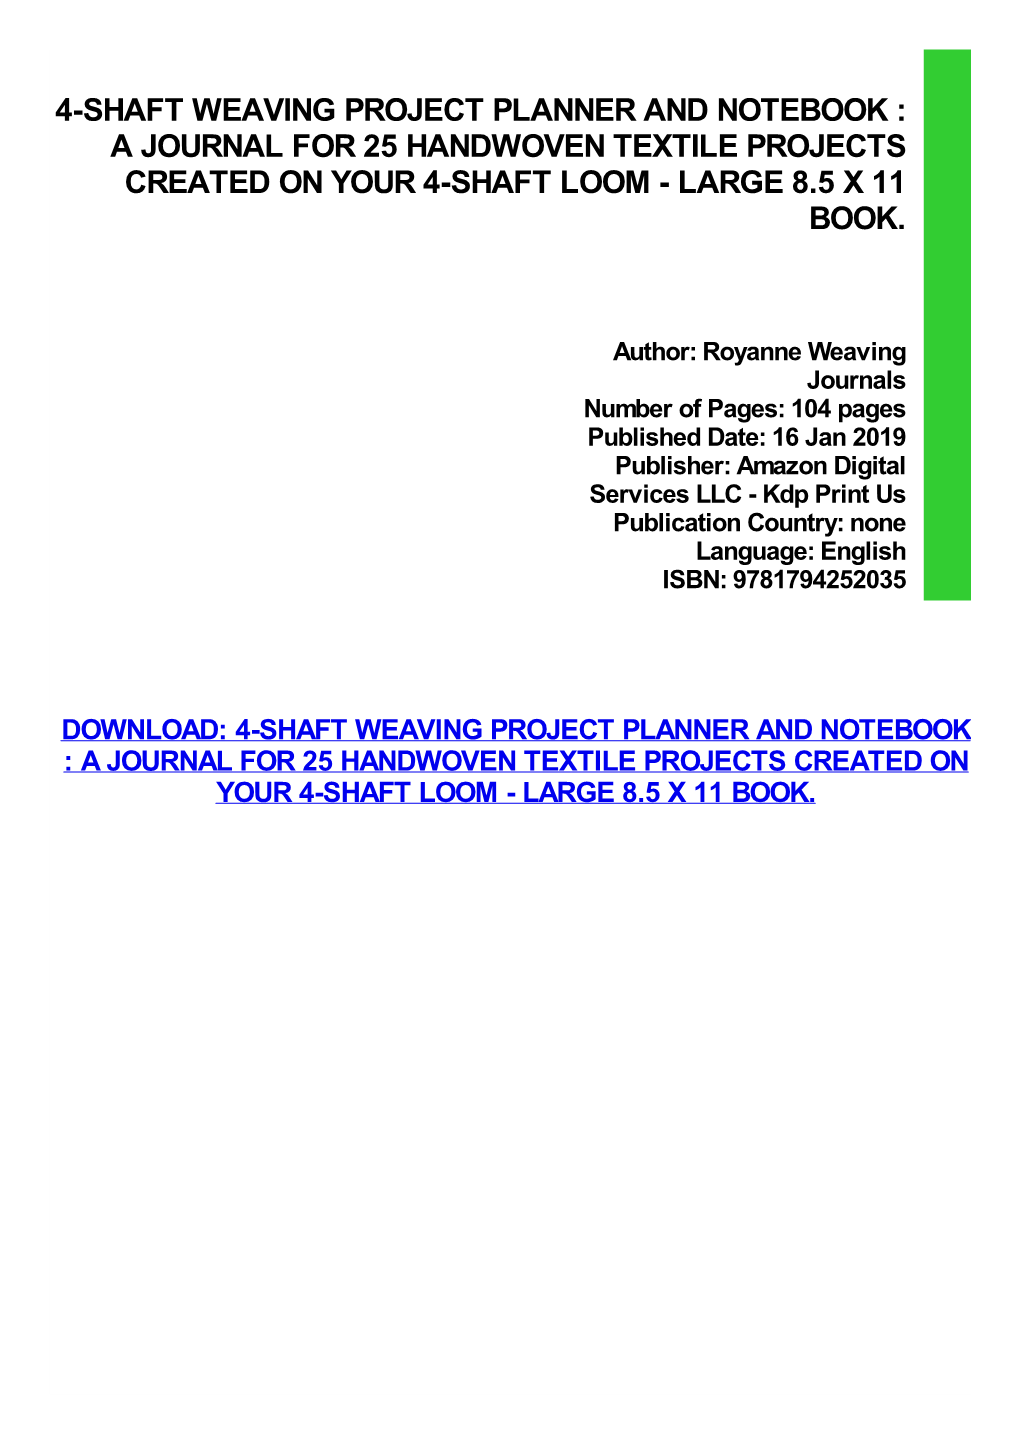 Read Book 4-Shaft Weaving Project Planner and Notebook